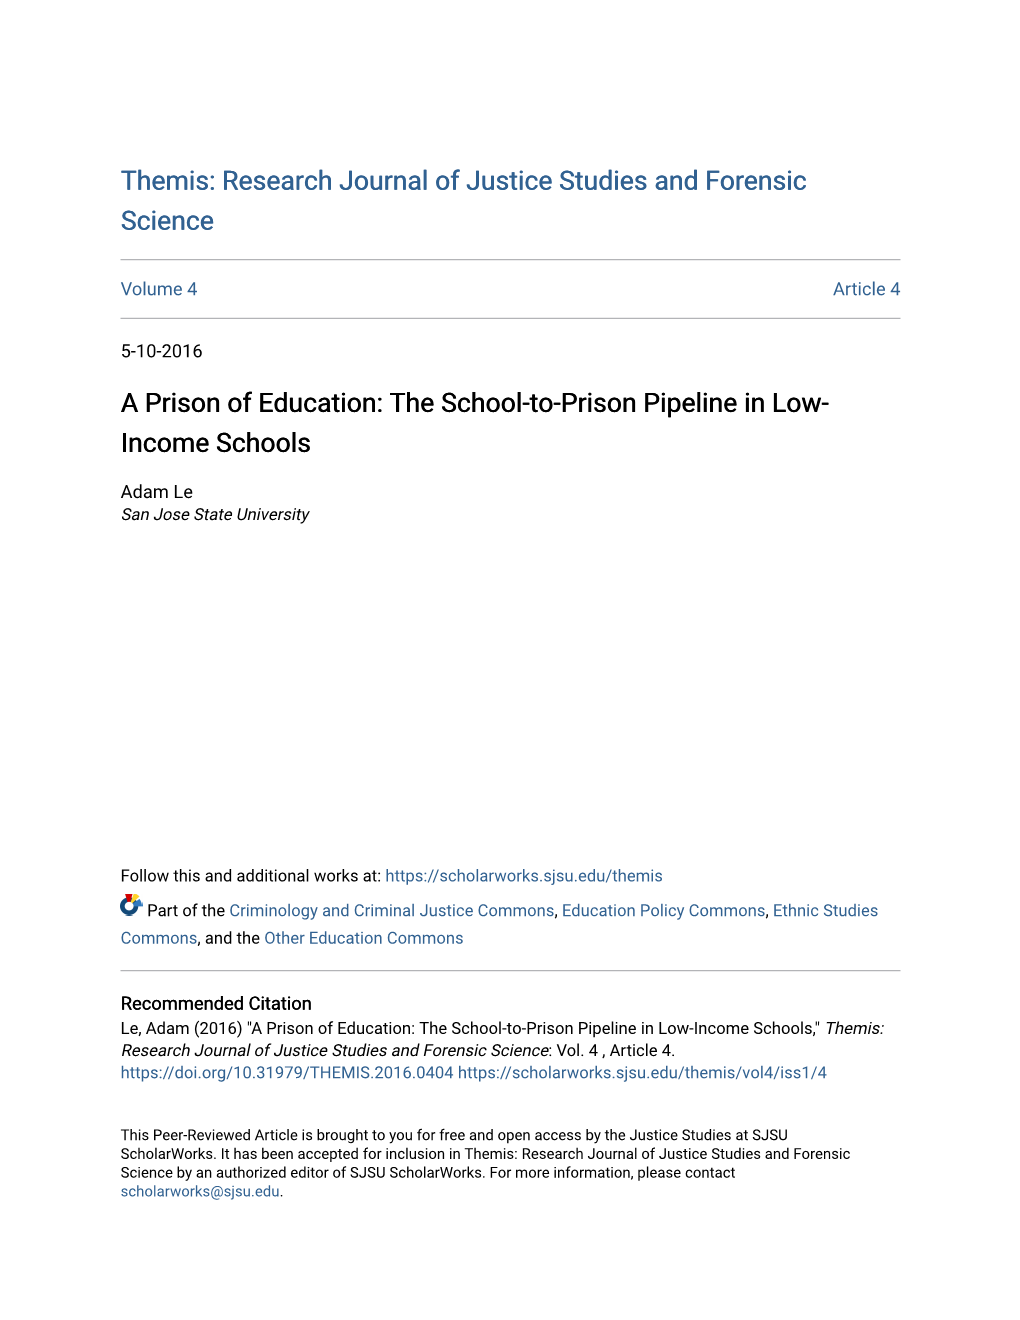 The School-To-Prison Pipeline in Low-Income Schools," Themis: Research Journal of Justice Studies and Forensic Science: Vol